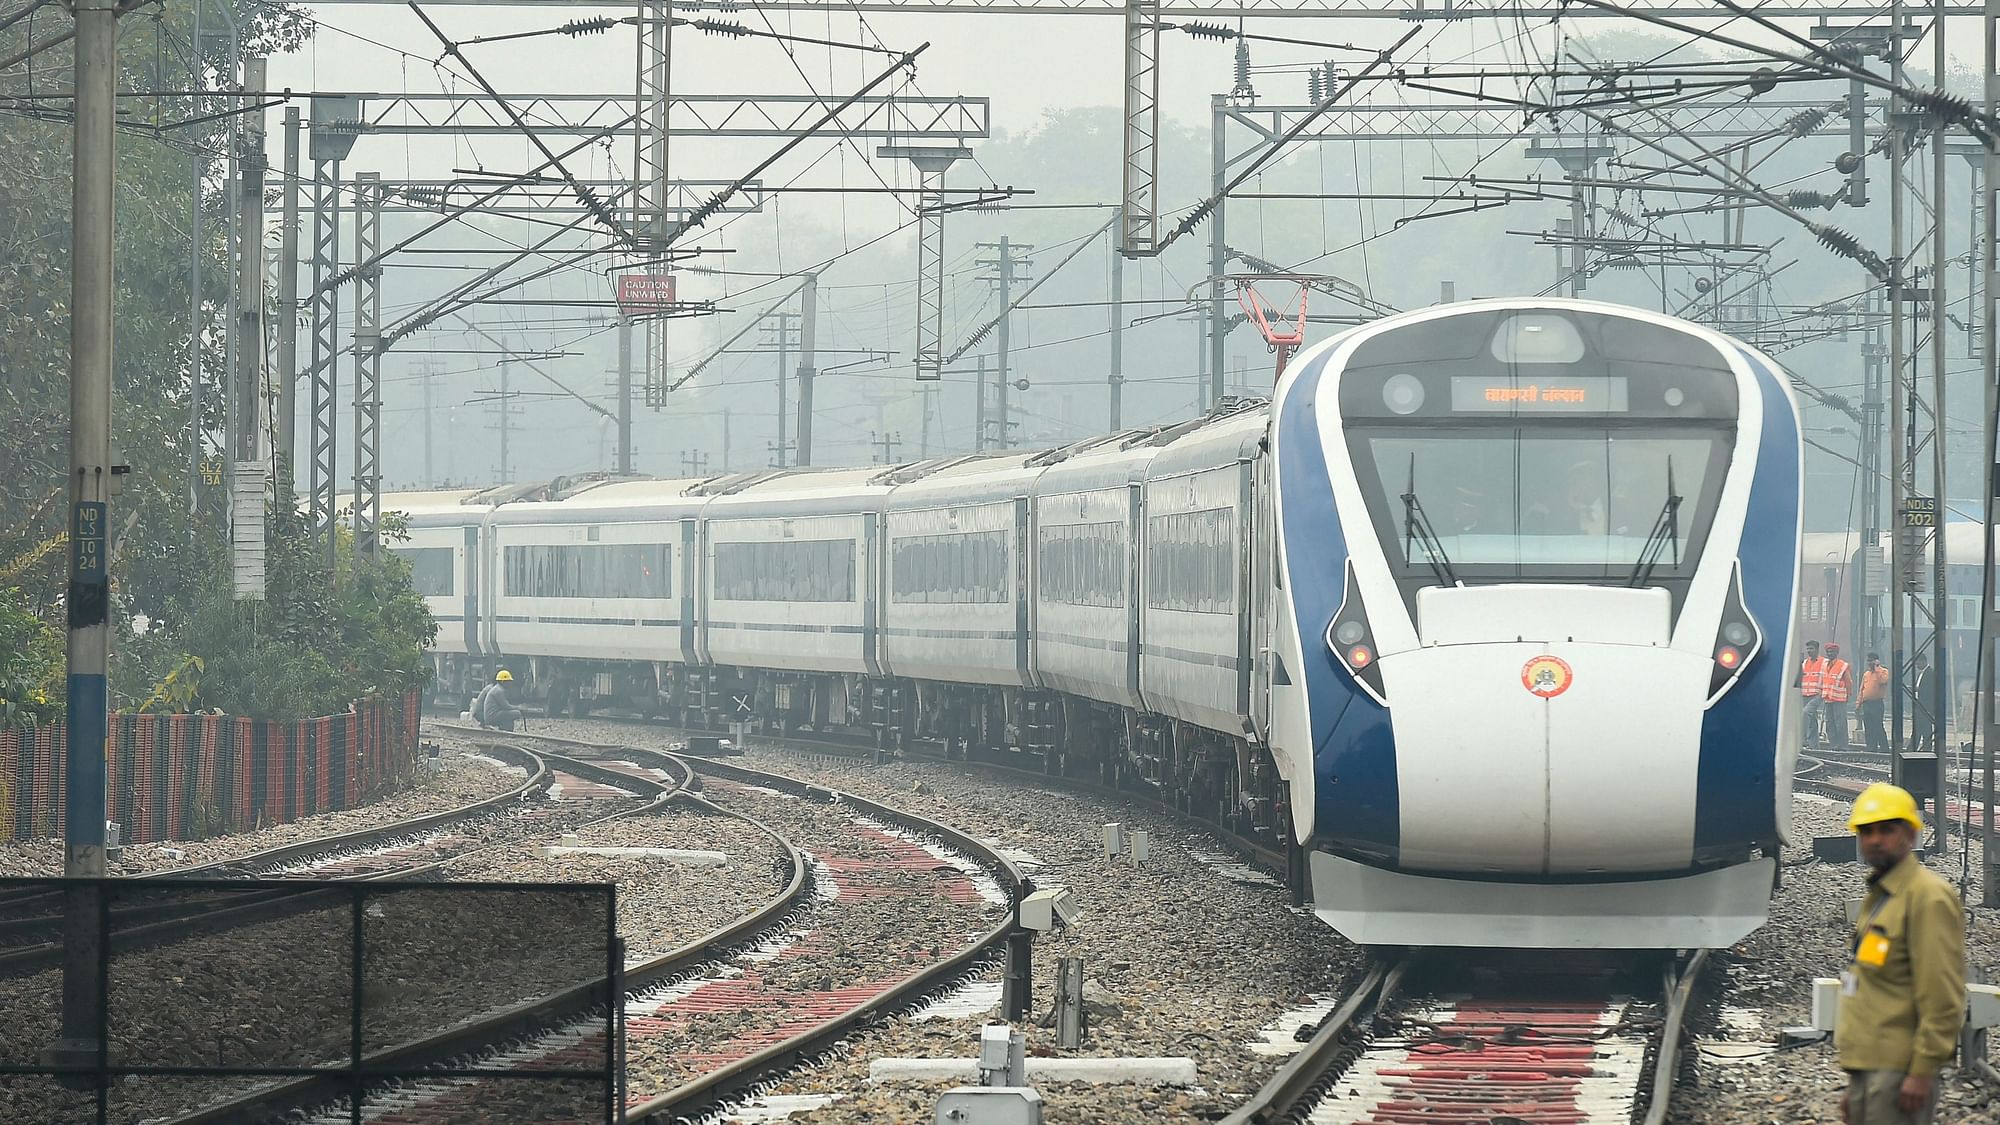 Vande Bharat Express, India’s first semi-high speed train, leaves from New Delhi Railway Station after it was flagged off by Prime Minister Narendra Modi on 15 February 2019.